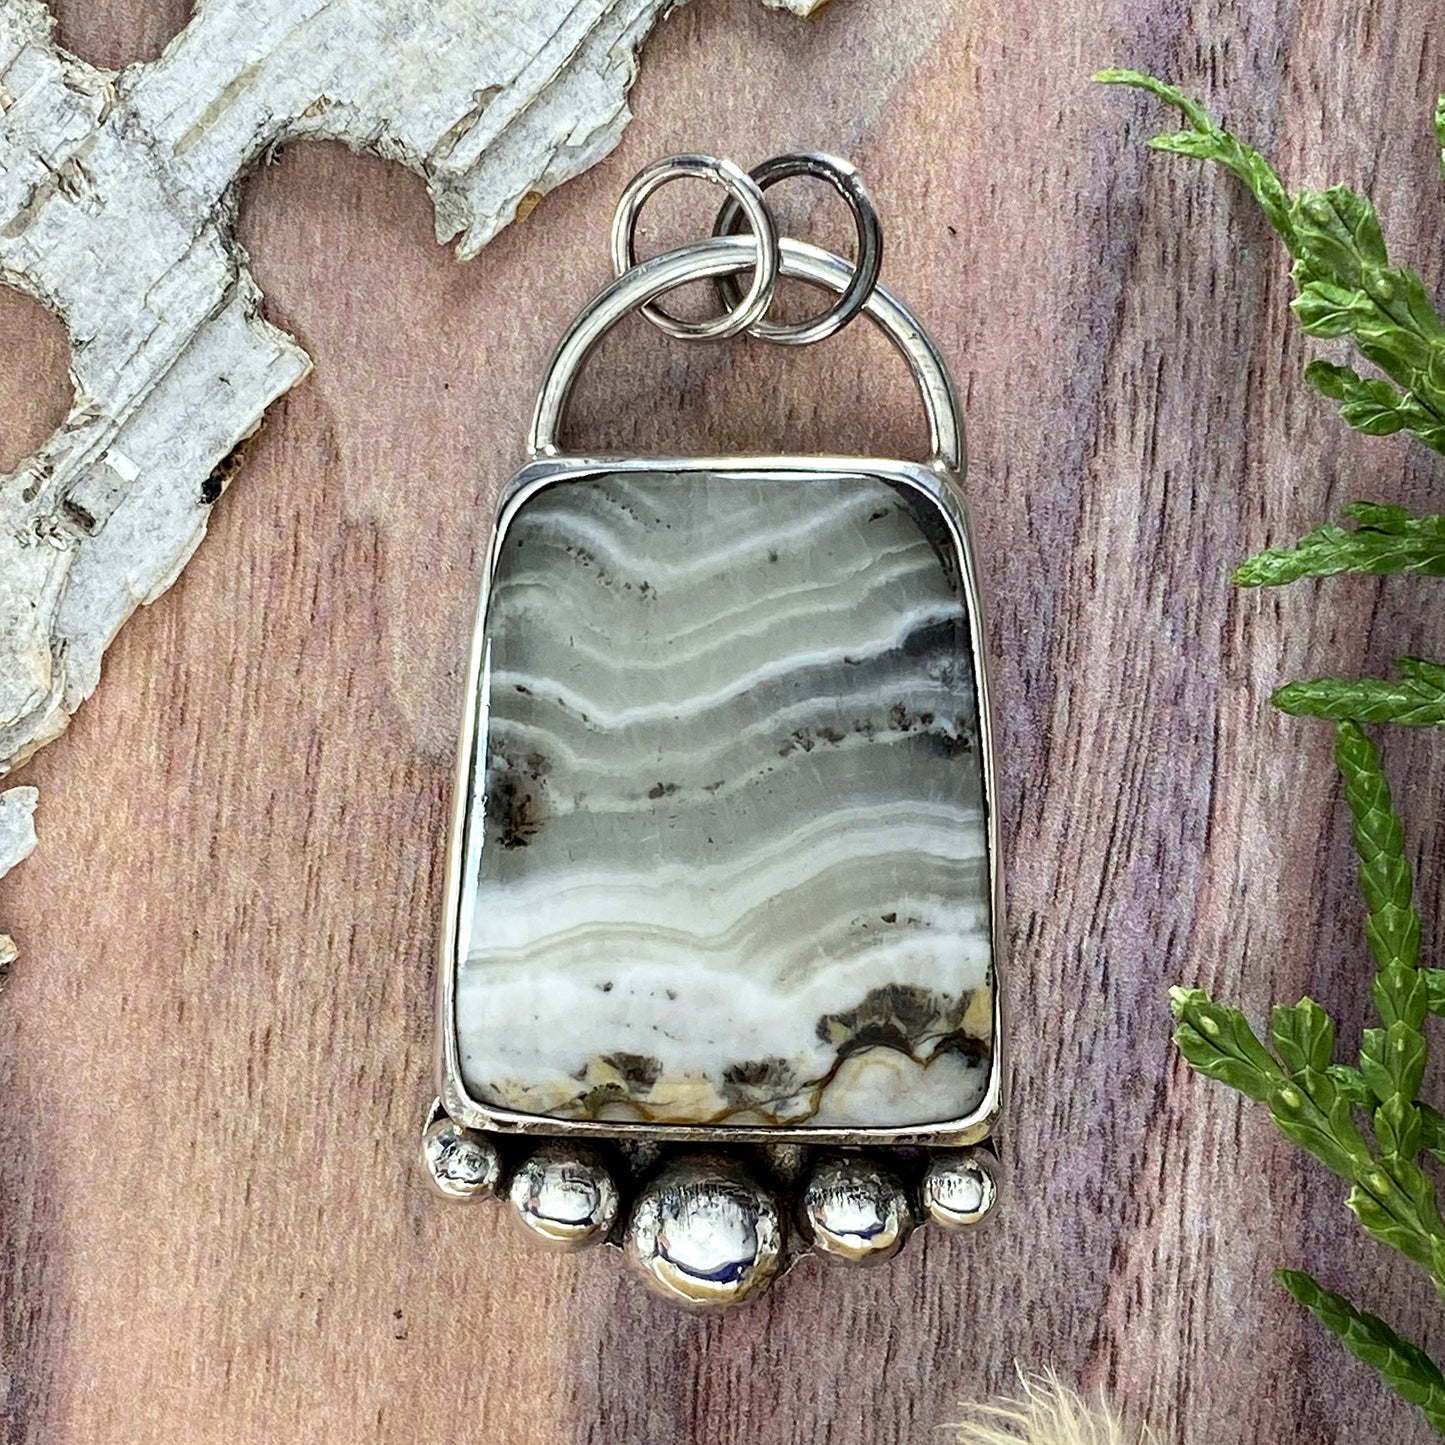 Sagenite Silver Lace Onyx Pendant Front View - Stone Treasures by the Lake